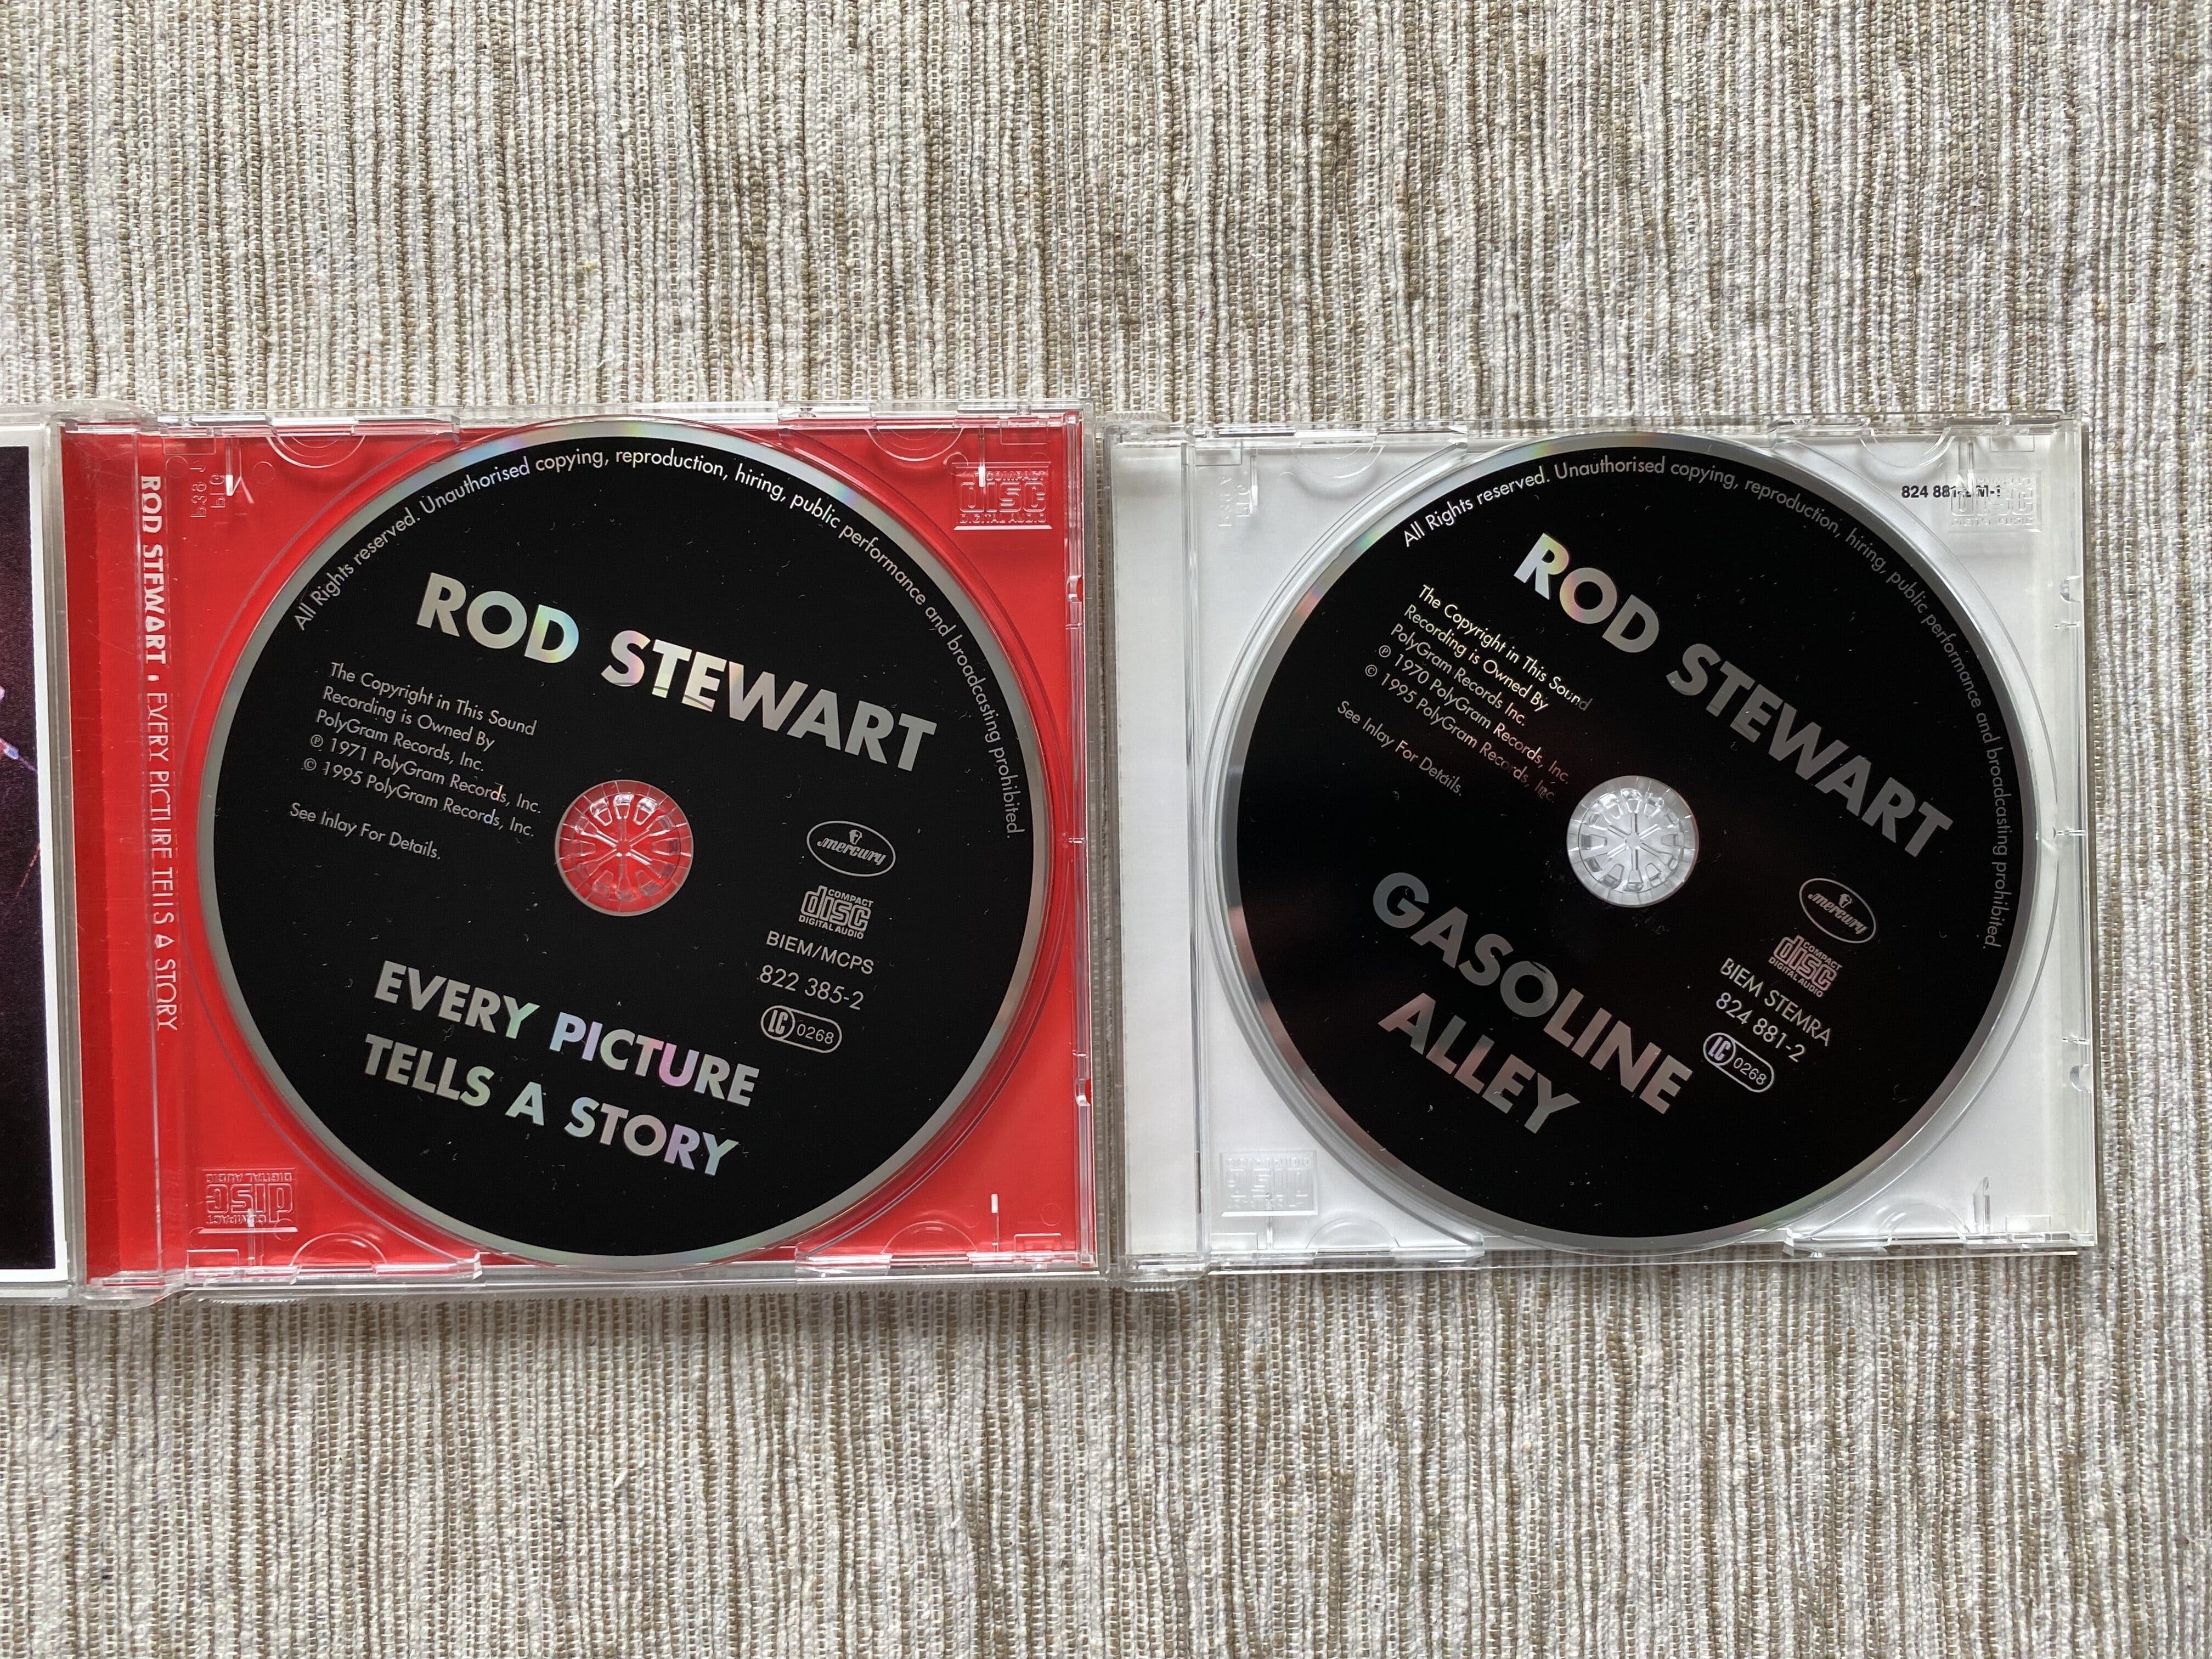 Rod Stewart - Gasolne Alley / Every Picture Tells a Story 2CD